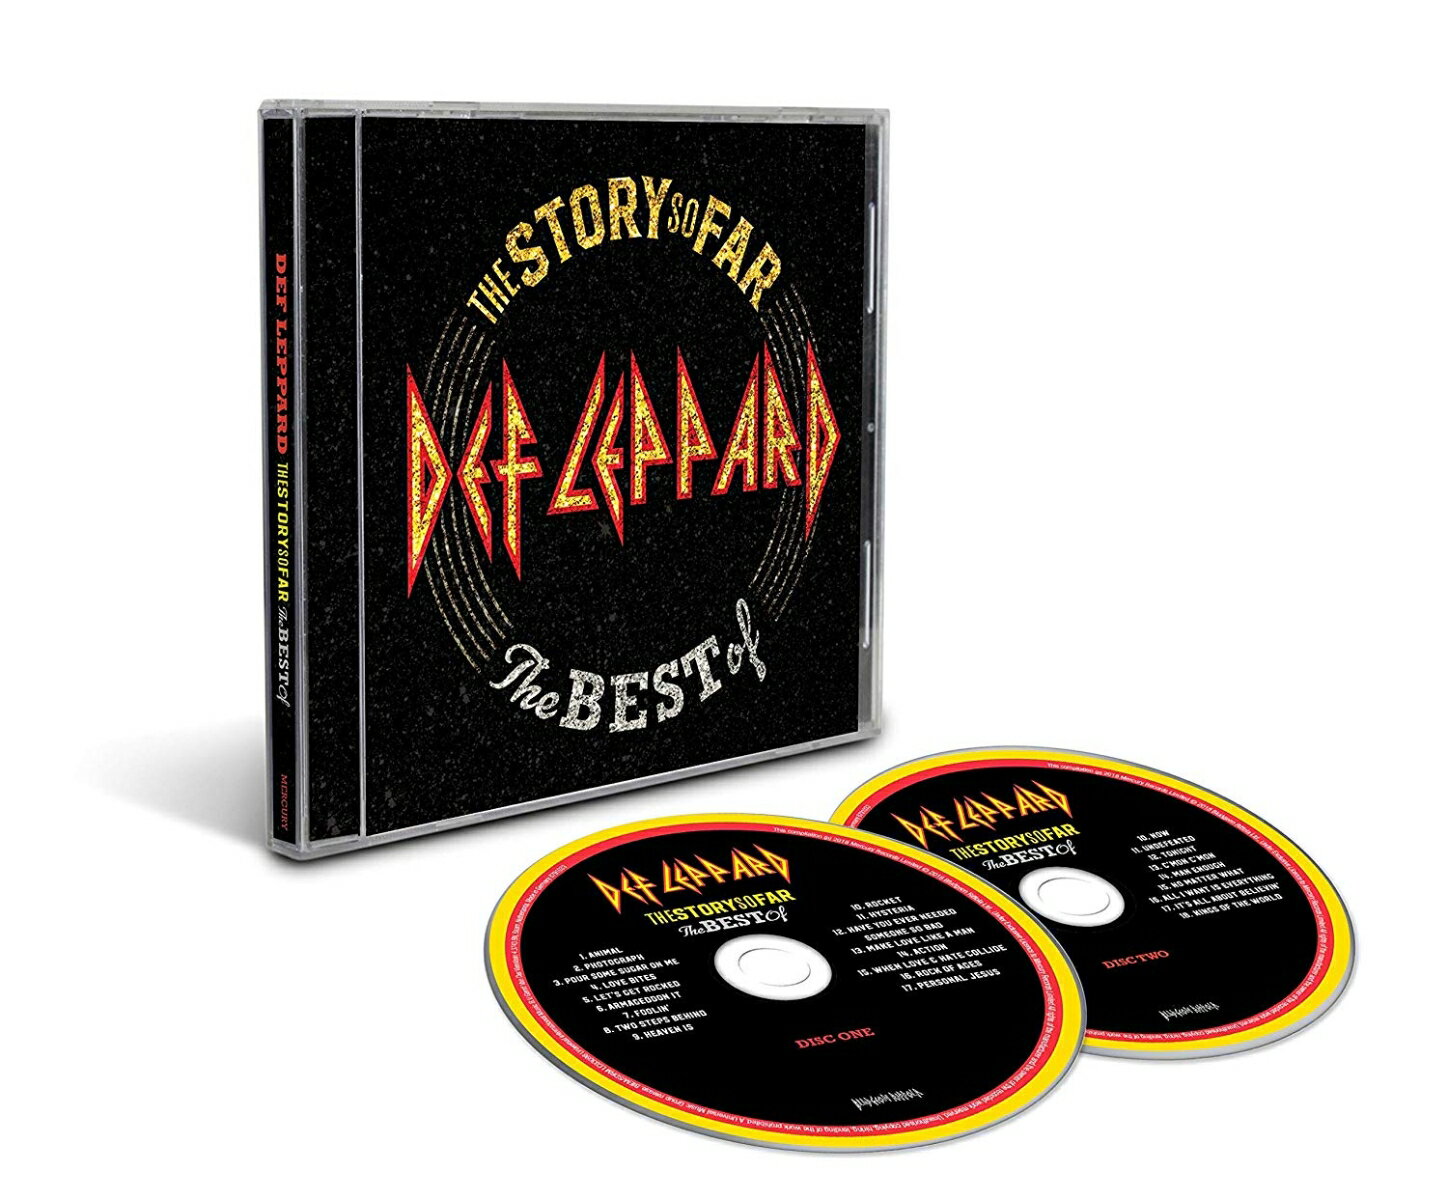 Def Leppardデフ・レパード 発売日：2018年11月30日 予約締切日：2018年10月23日 The Story So Far…The Best Of Def Leppard (2CD) JAN：0602567910336 6791033 Mercury CD ロック・ポップス ハードロック・ヘヴィメタル 輸入盤